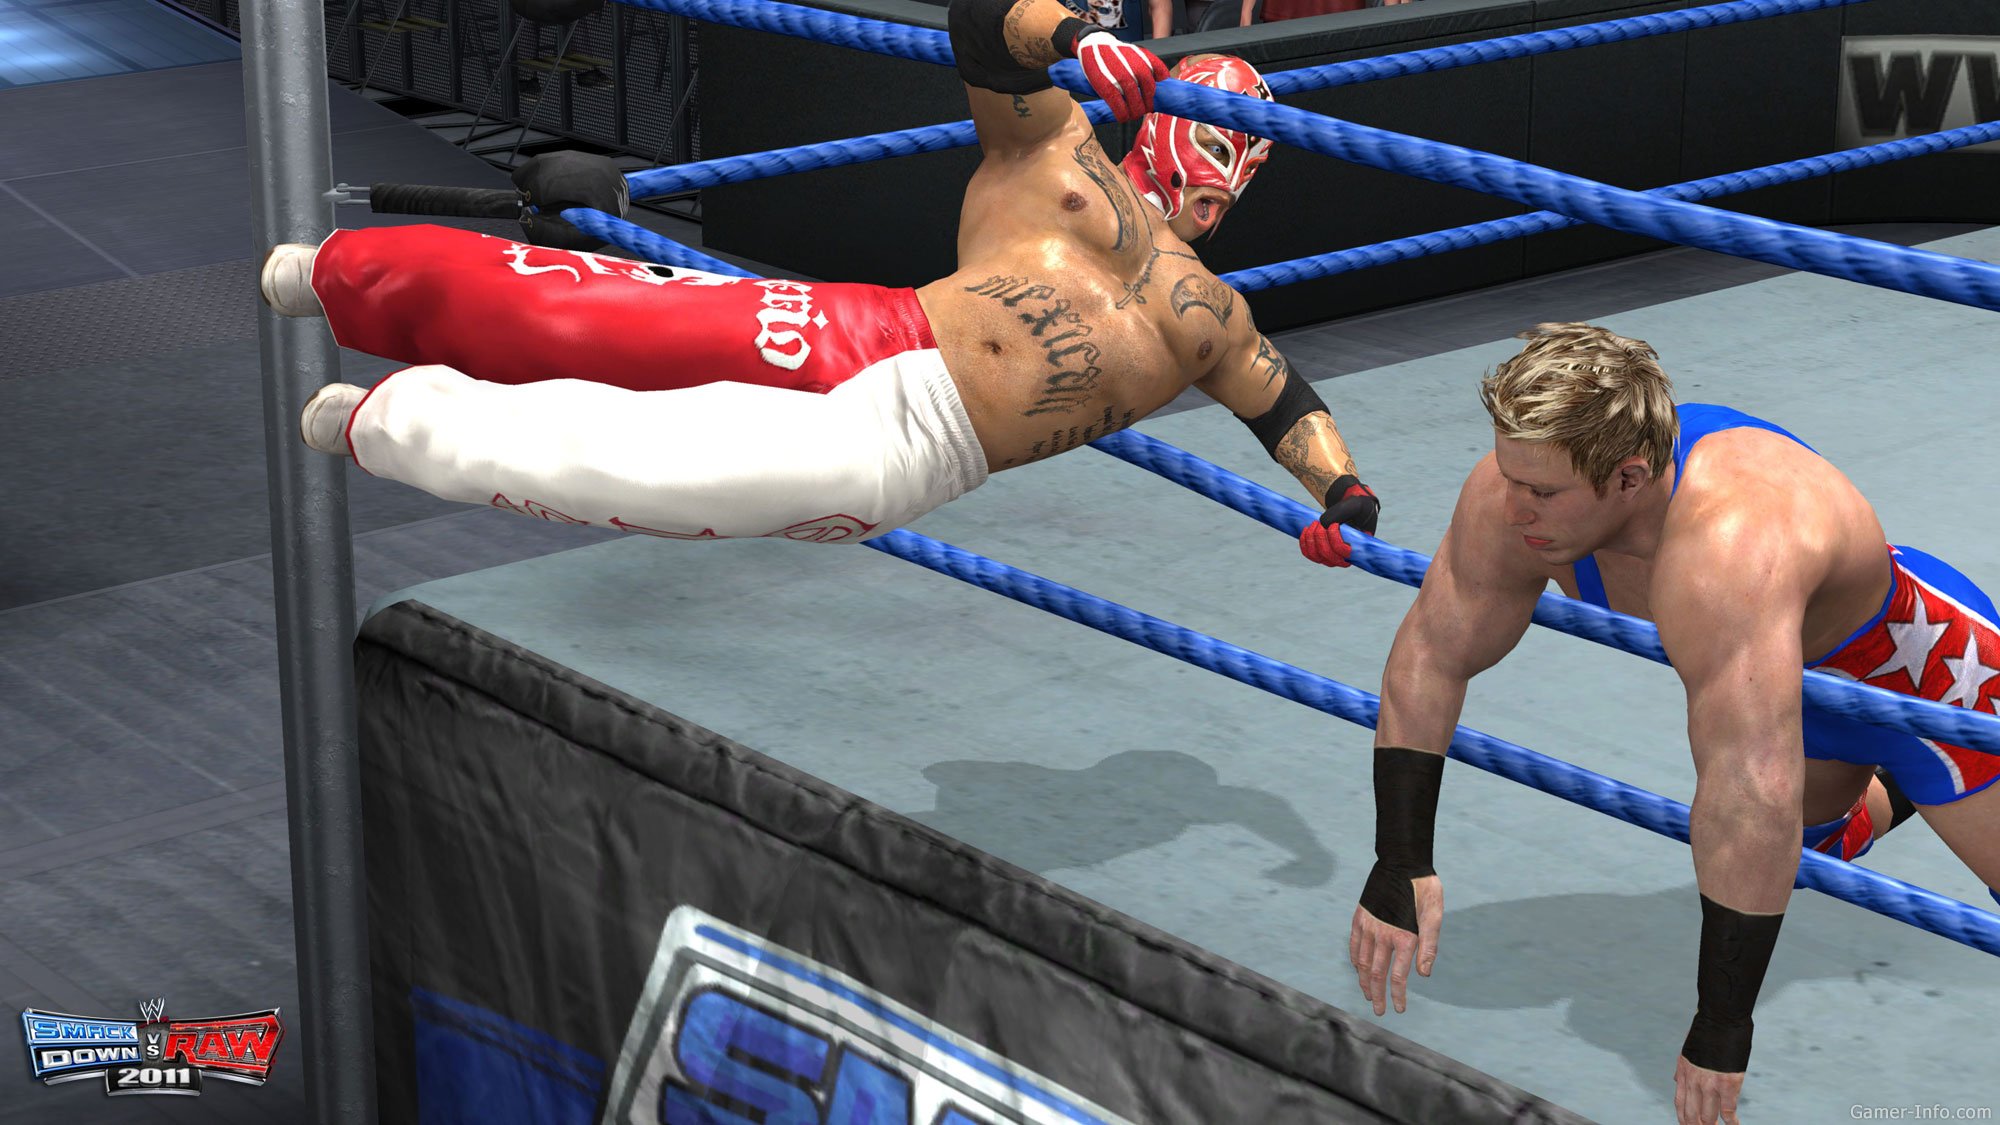 Wwe Smackdown Vs Raw 11 10 Video Game